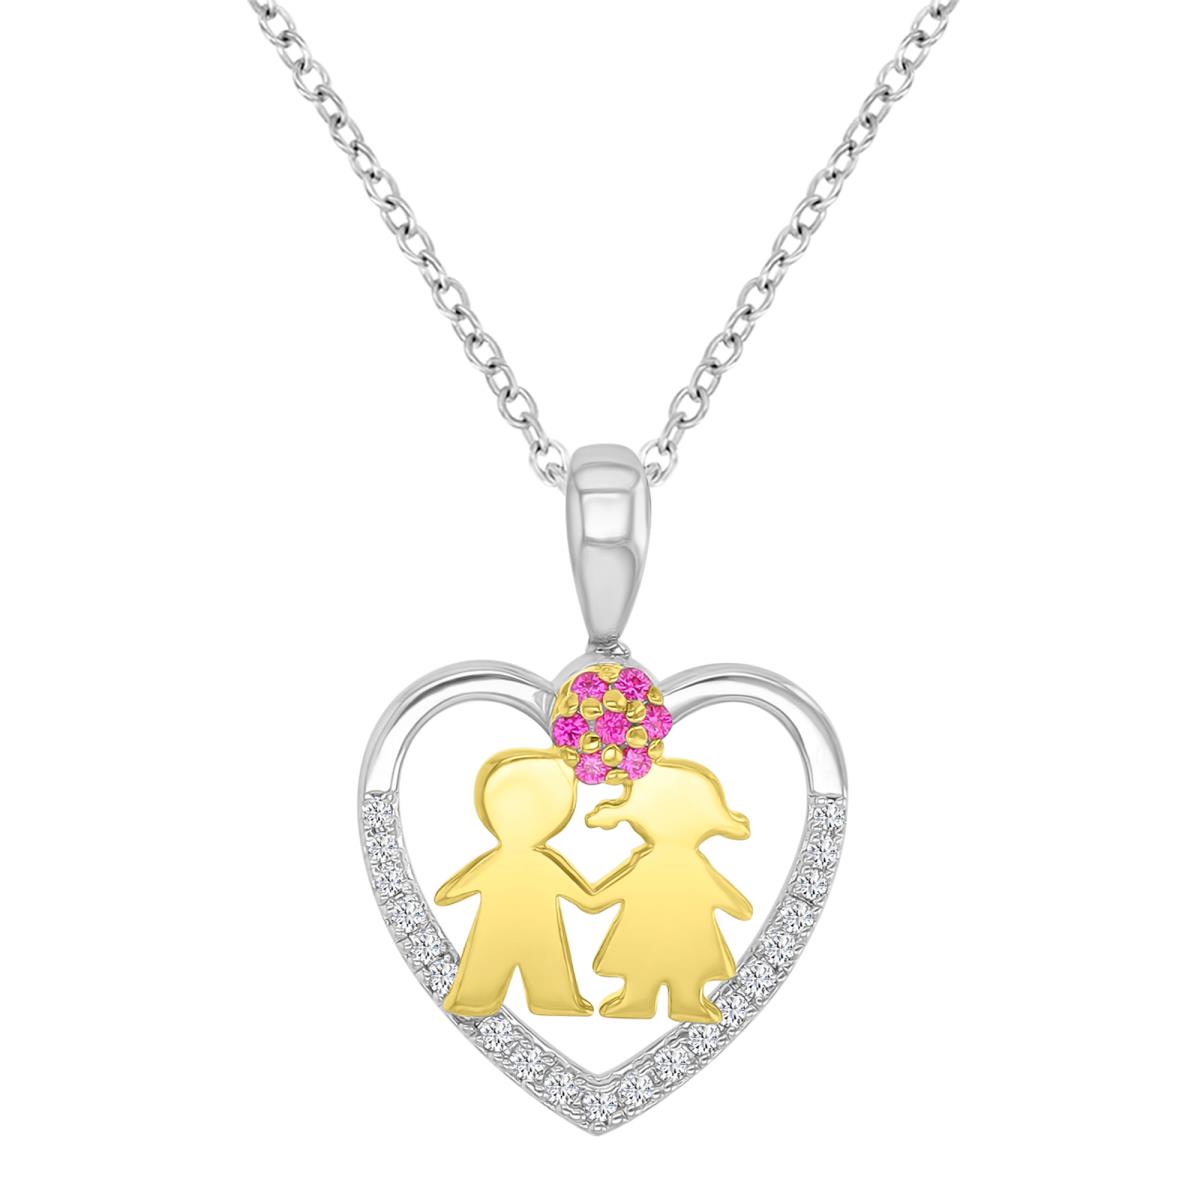 Sterling Silver Rhodium & 1Micron 14ky Gold Plating Rnd Cr Ruby & Cr White Sap Heart with Boy/Girl 18"Necklace